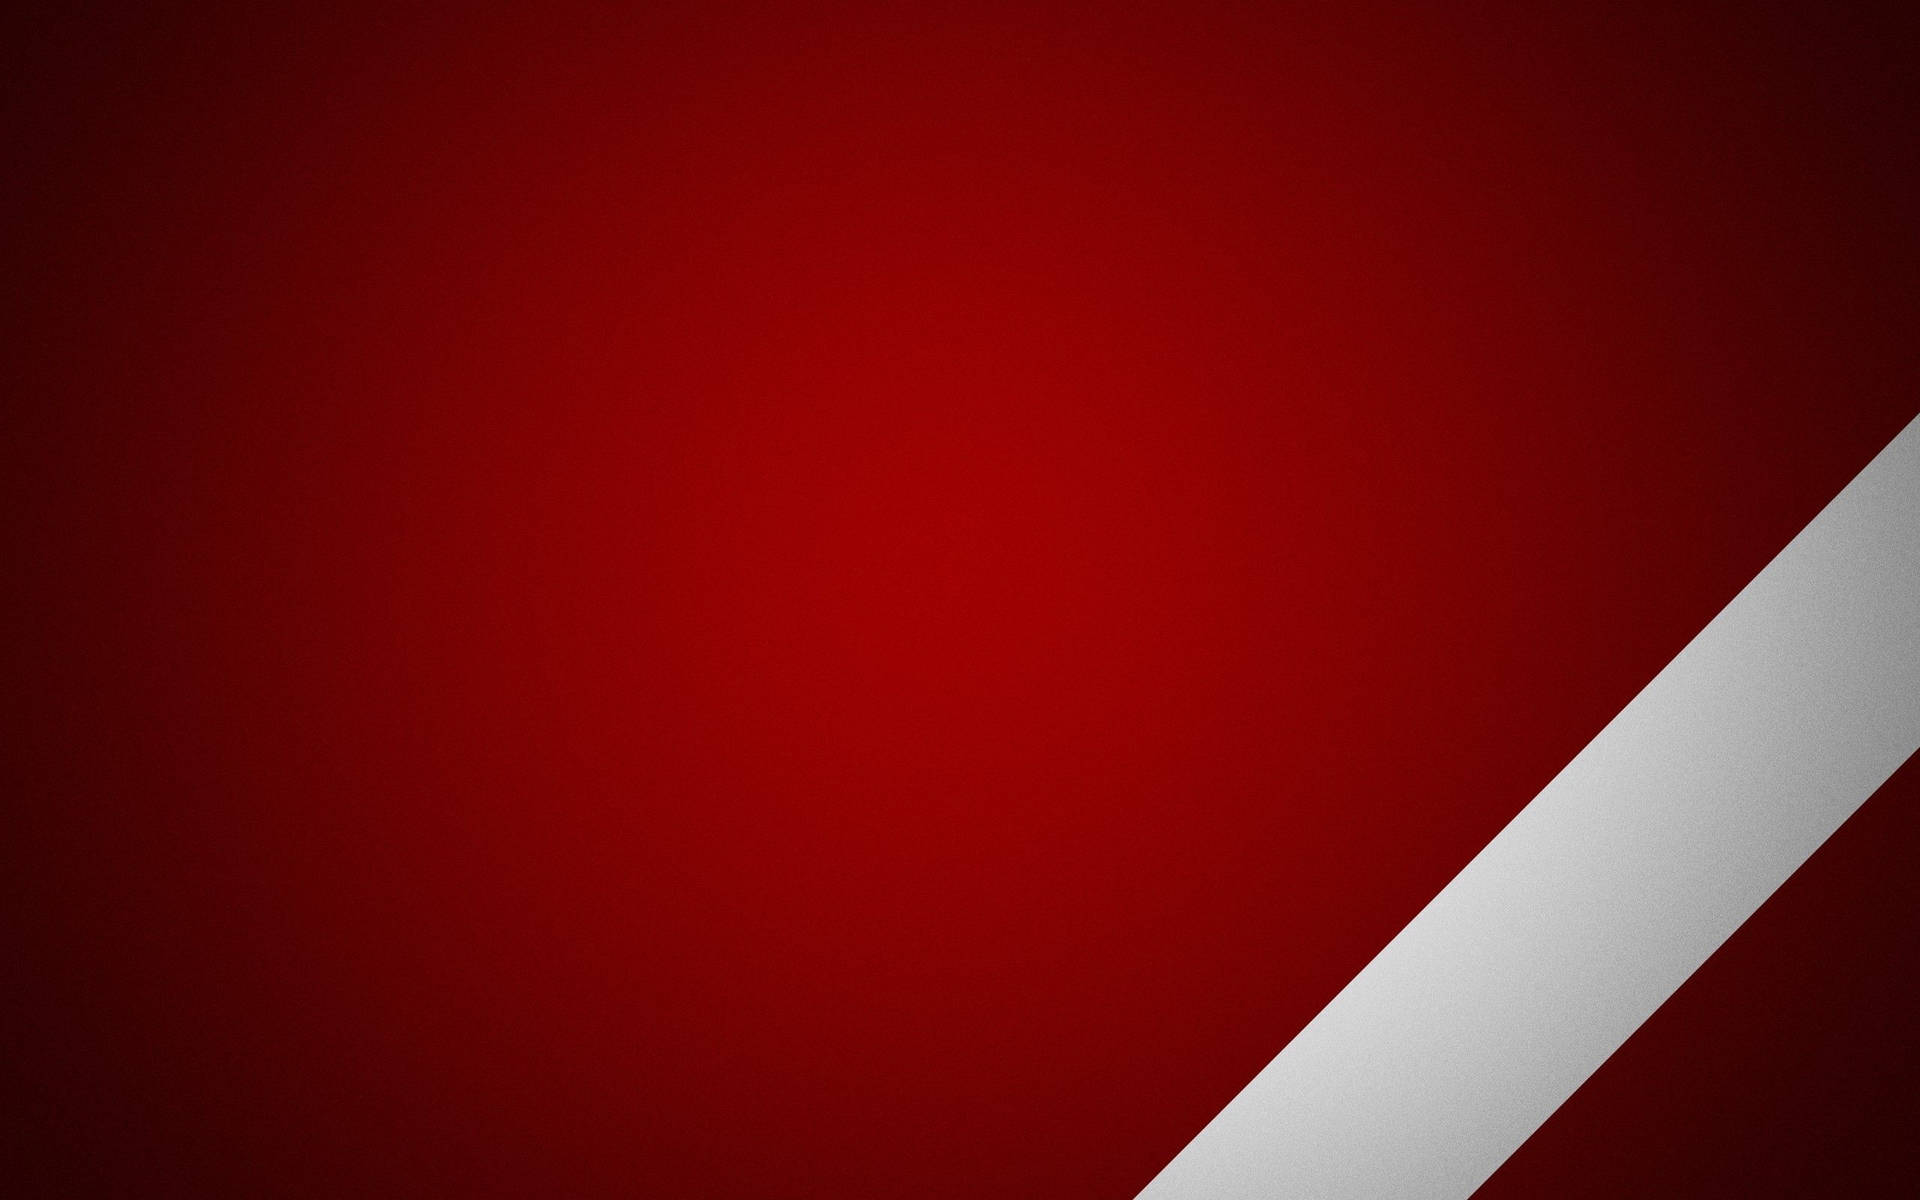 White Thick Line Red Background